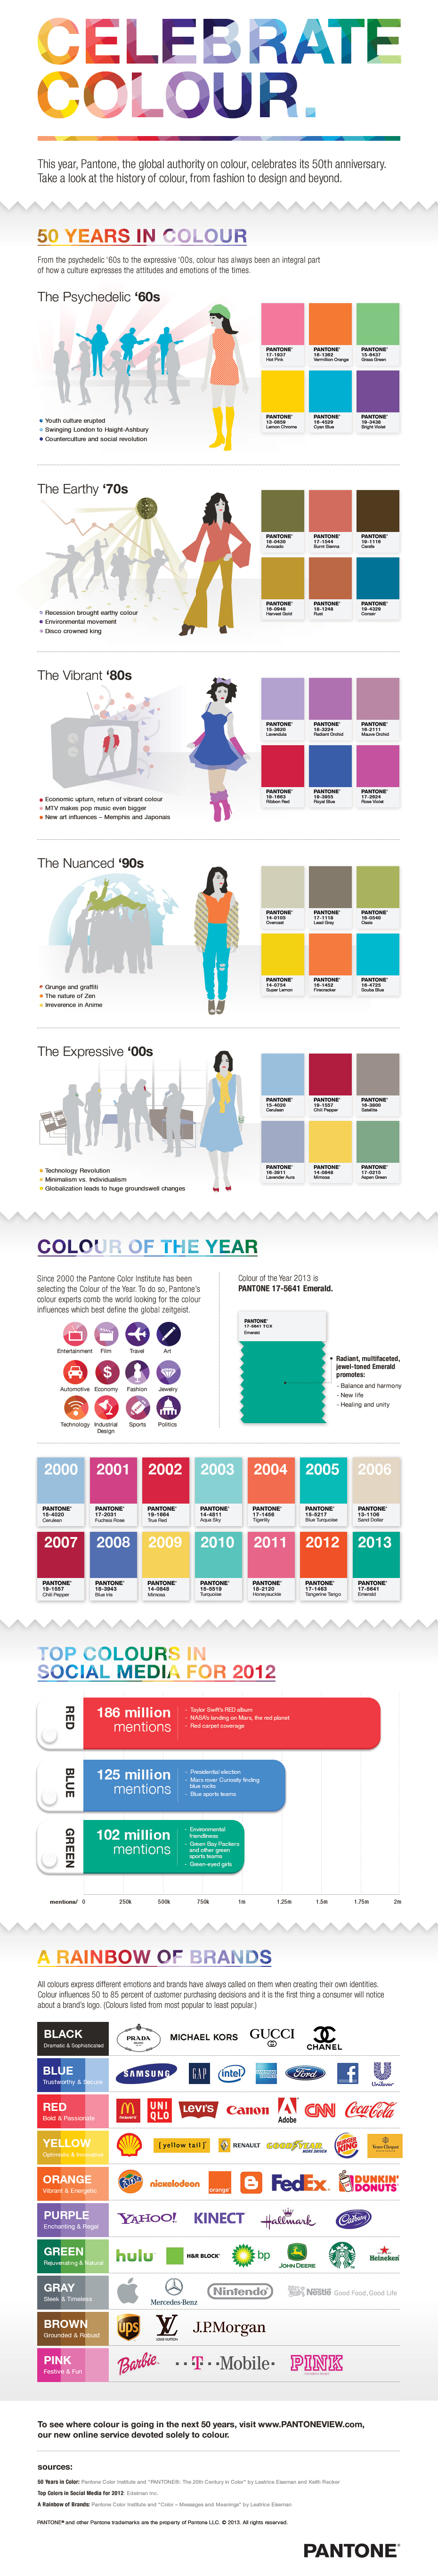 Pantone 50 Years of Colour Infographic_v16_930w_UK